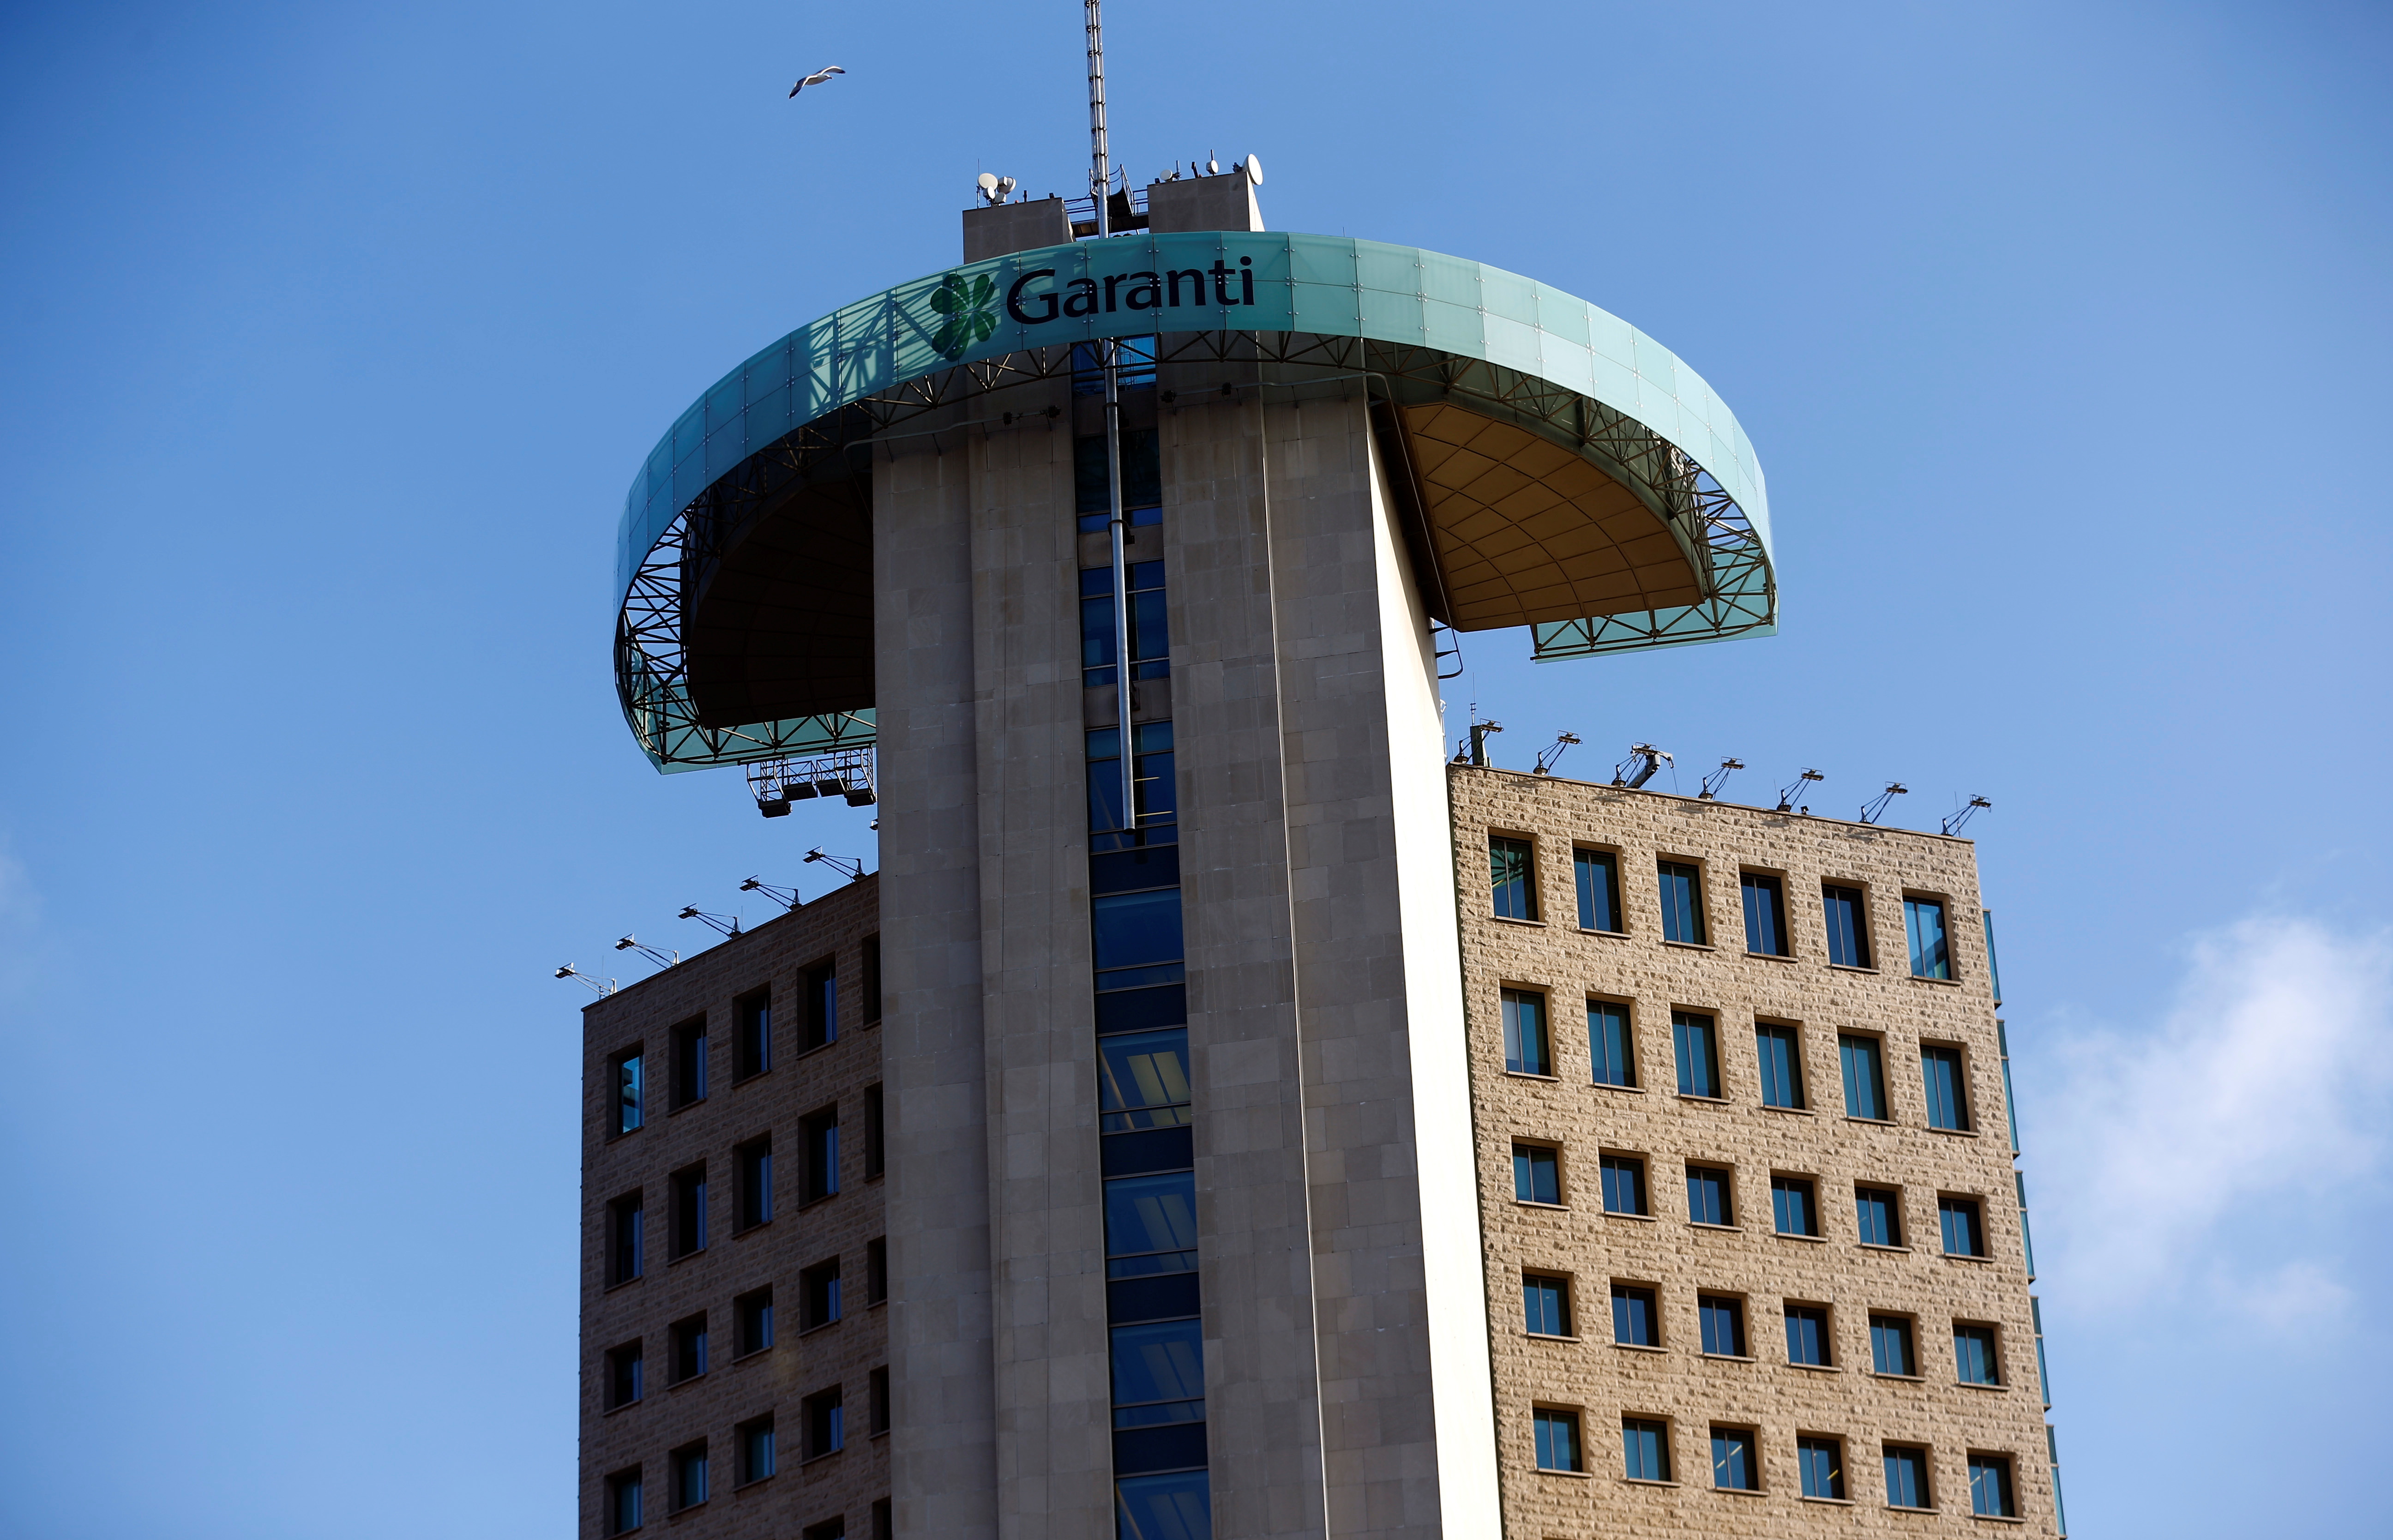 The headquarters of Garanti Bank is pictured in Istanbul, Turkey